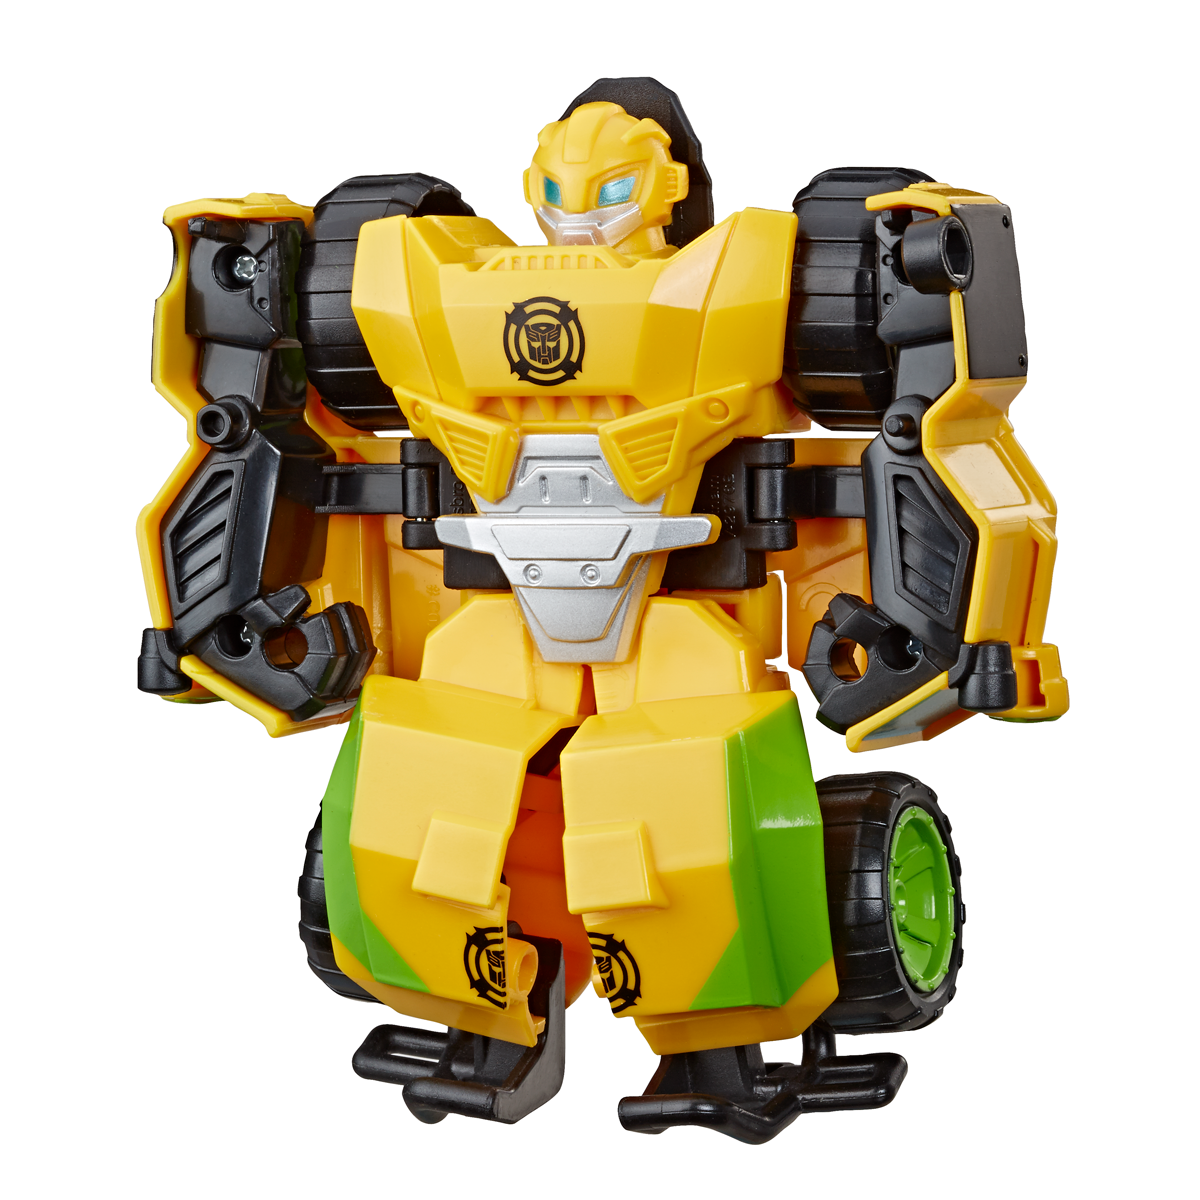 Playskool Heroes 4 G1 Transformers Rescue Bots Grab-Pack Limited Edition  Action Figures - Bumblebee, Chase Police-Bot, Heatwave Fire-Bot, and  Optimus Prime - SET of 4 - Epic Kids Toys